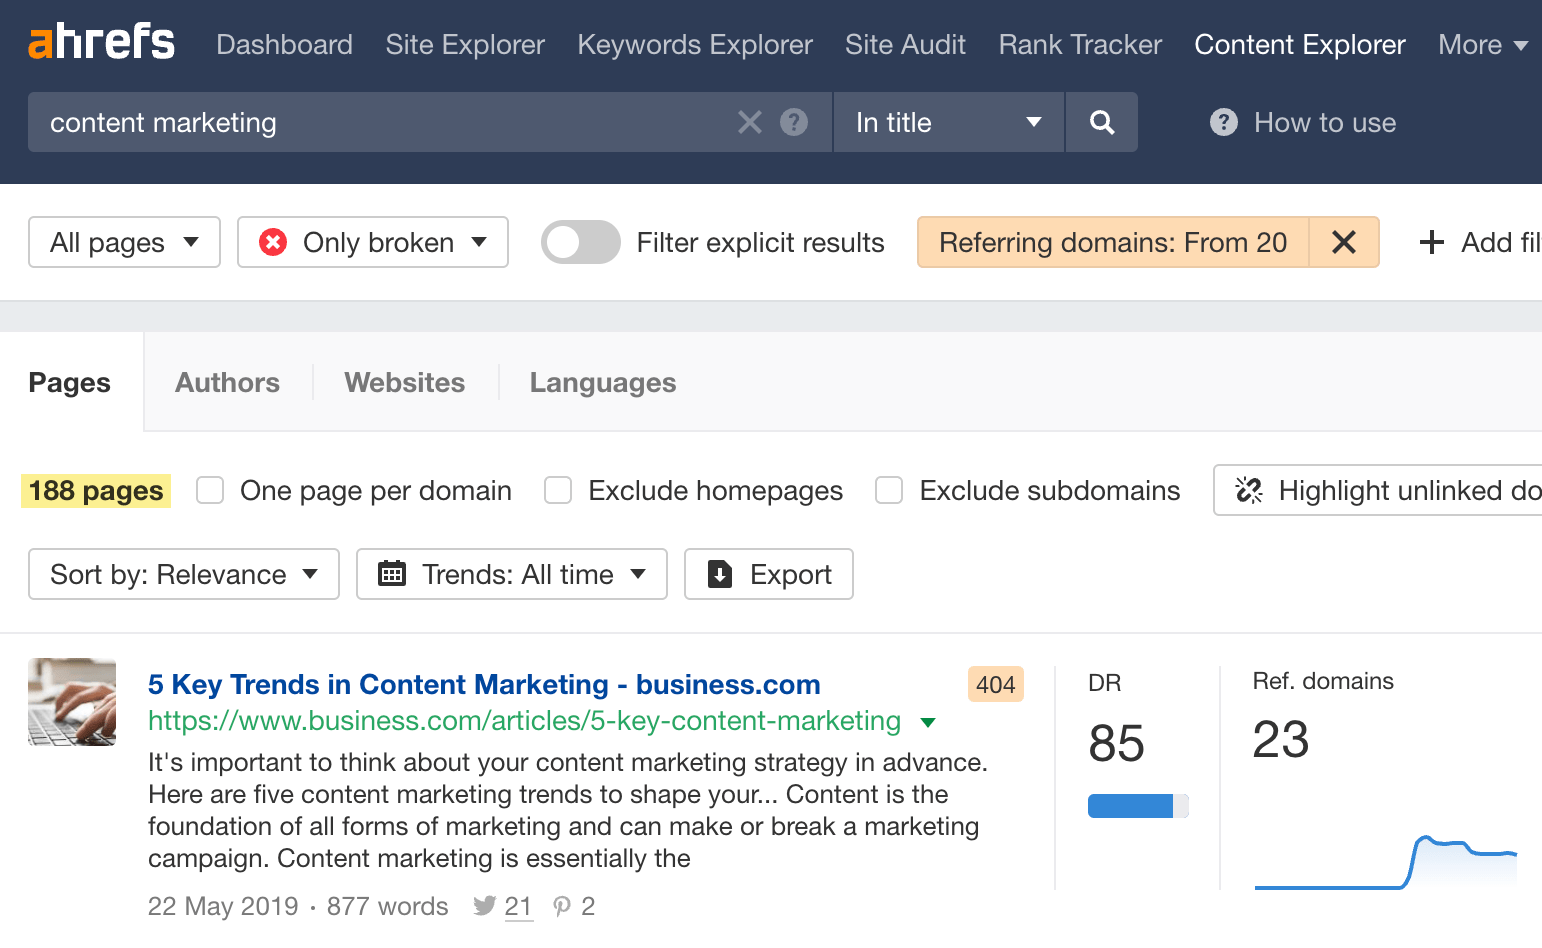 Broken pages with 20+ referring domains in Ahrefs' Content Explorer